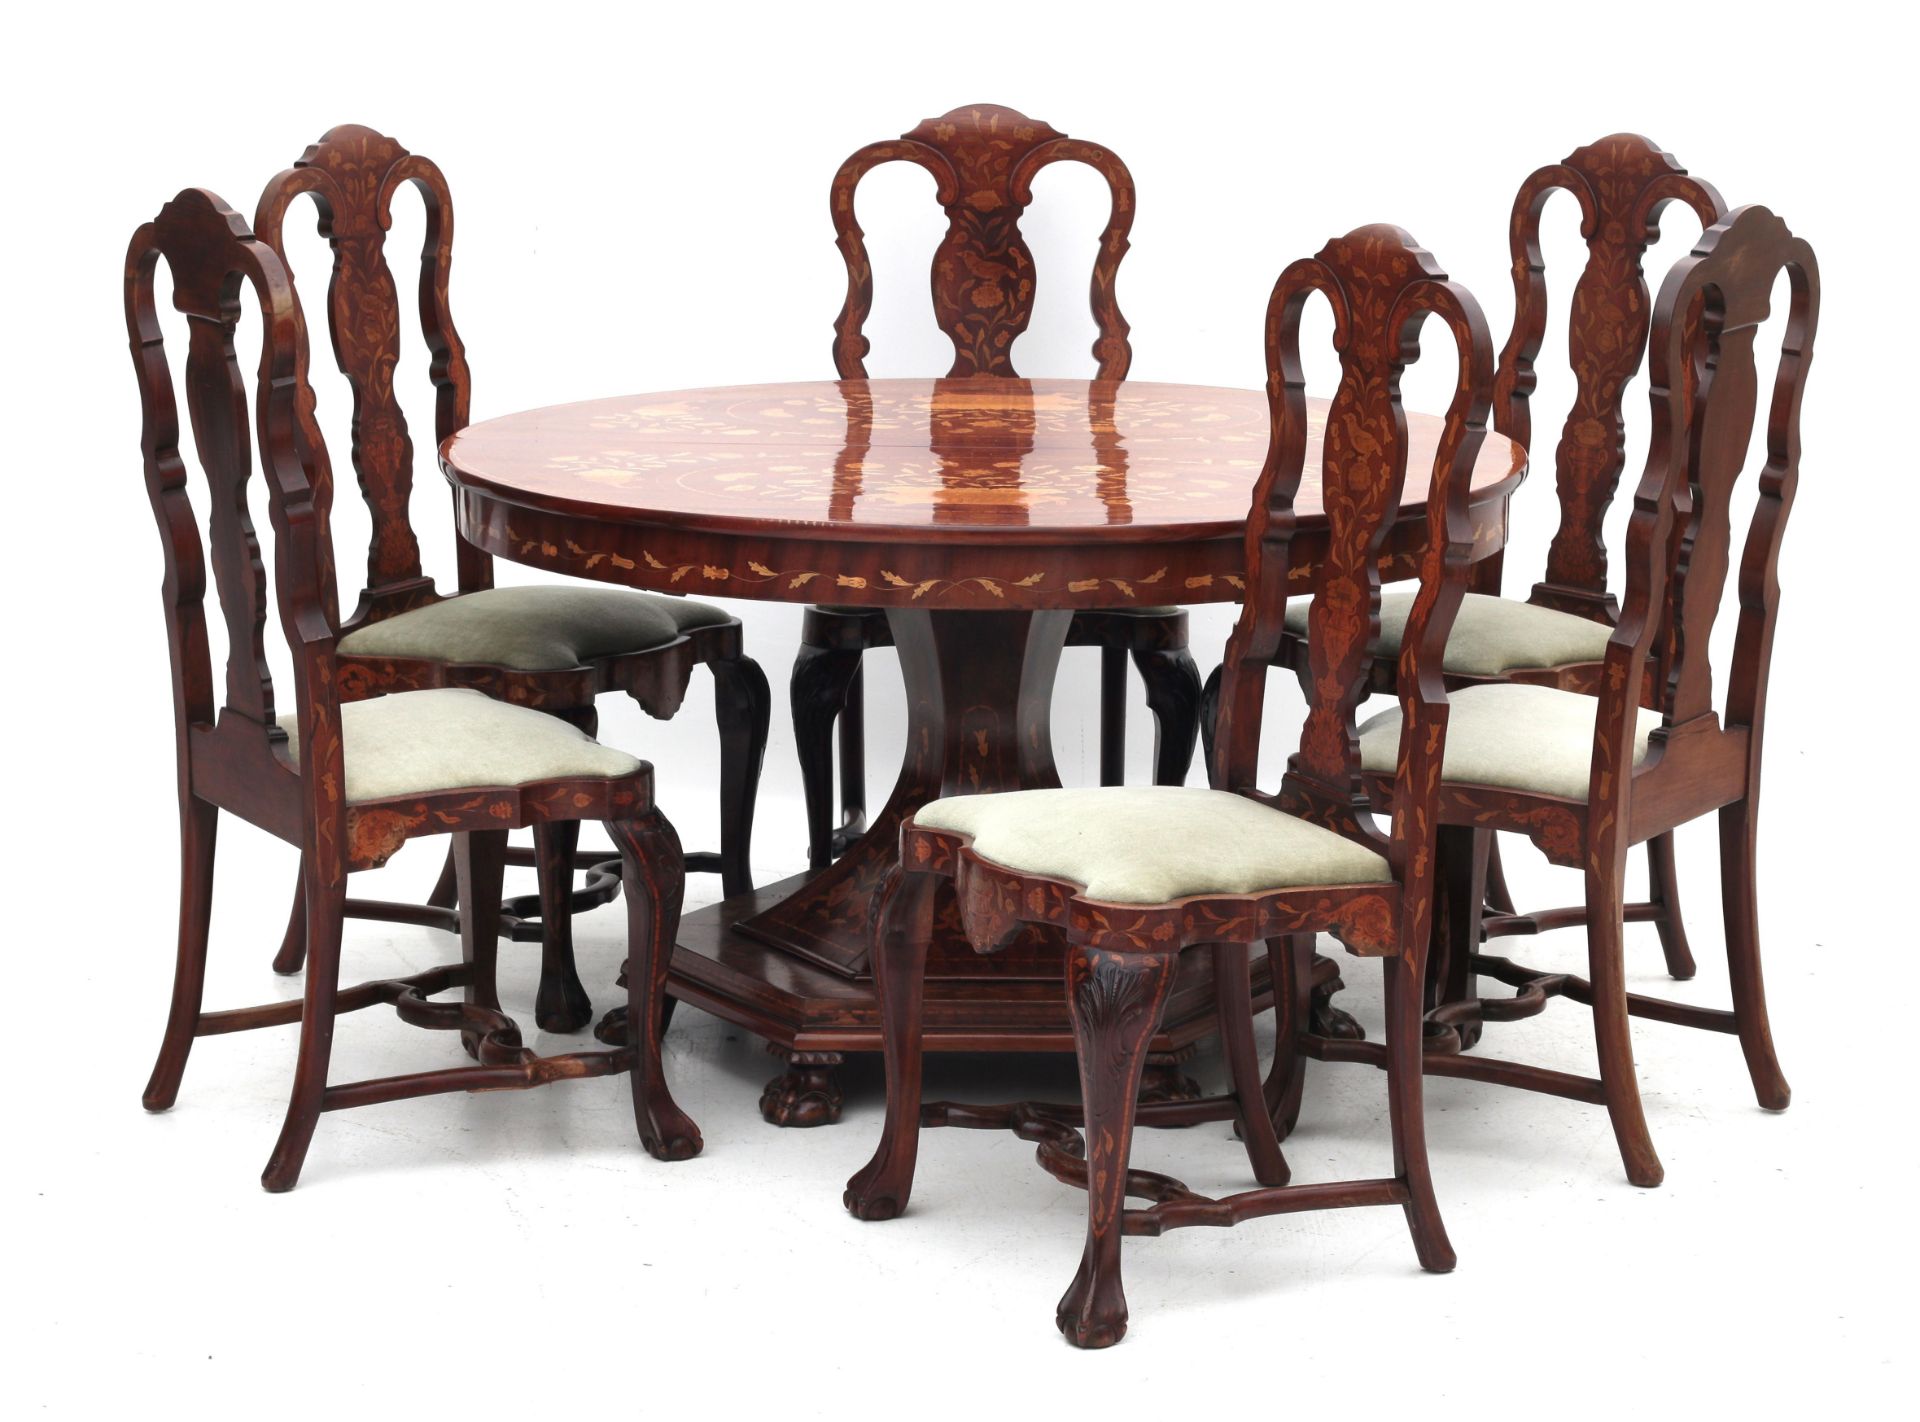 An inlaid extending dining table with six chairs.